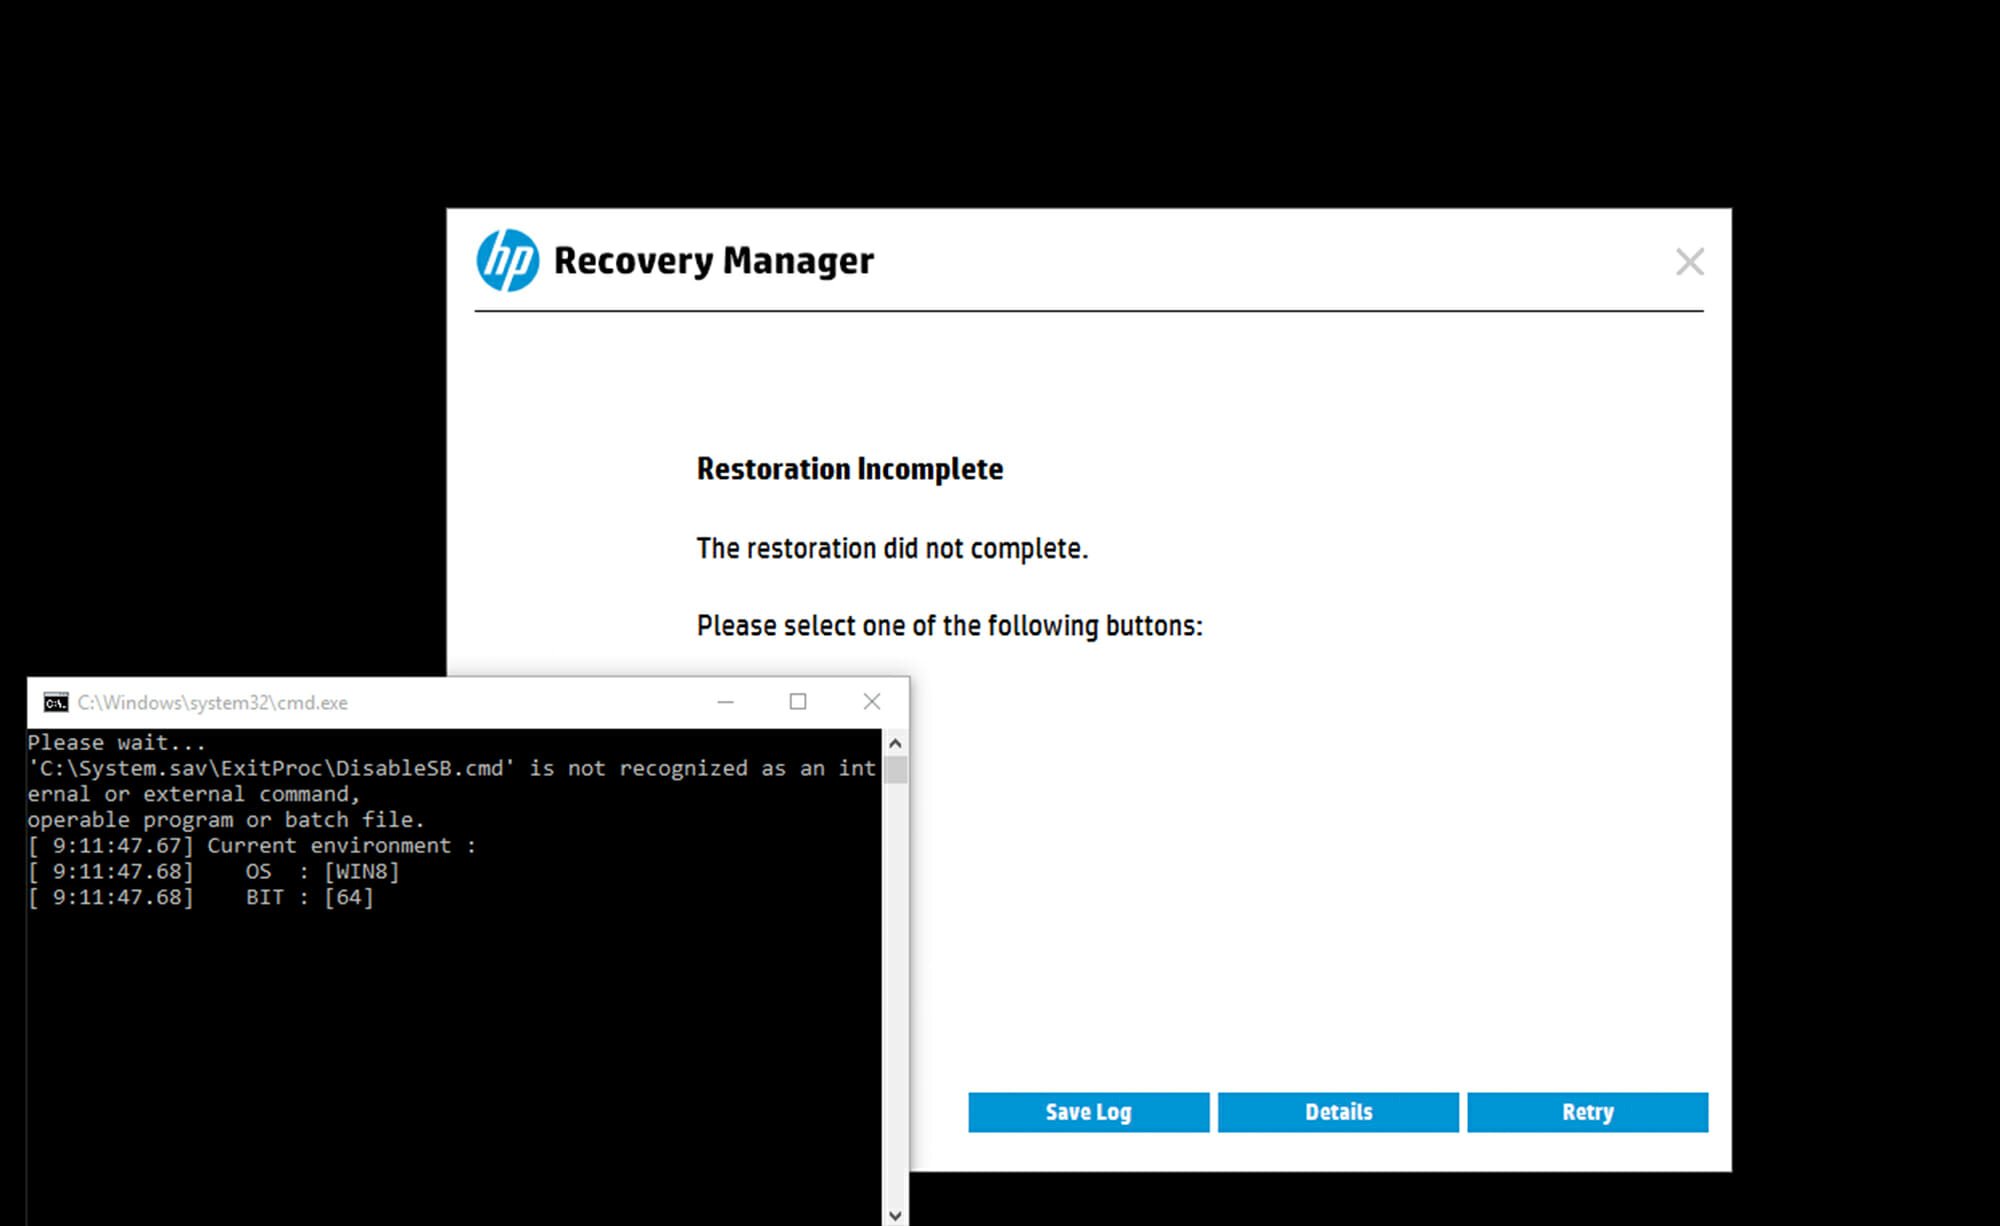 HP Recovery Manager Restoration Incomplete